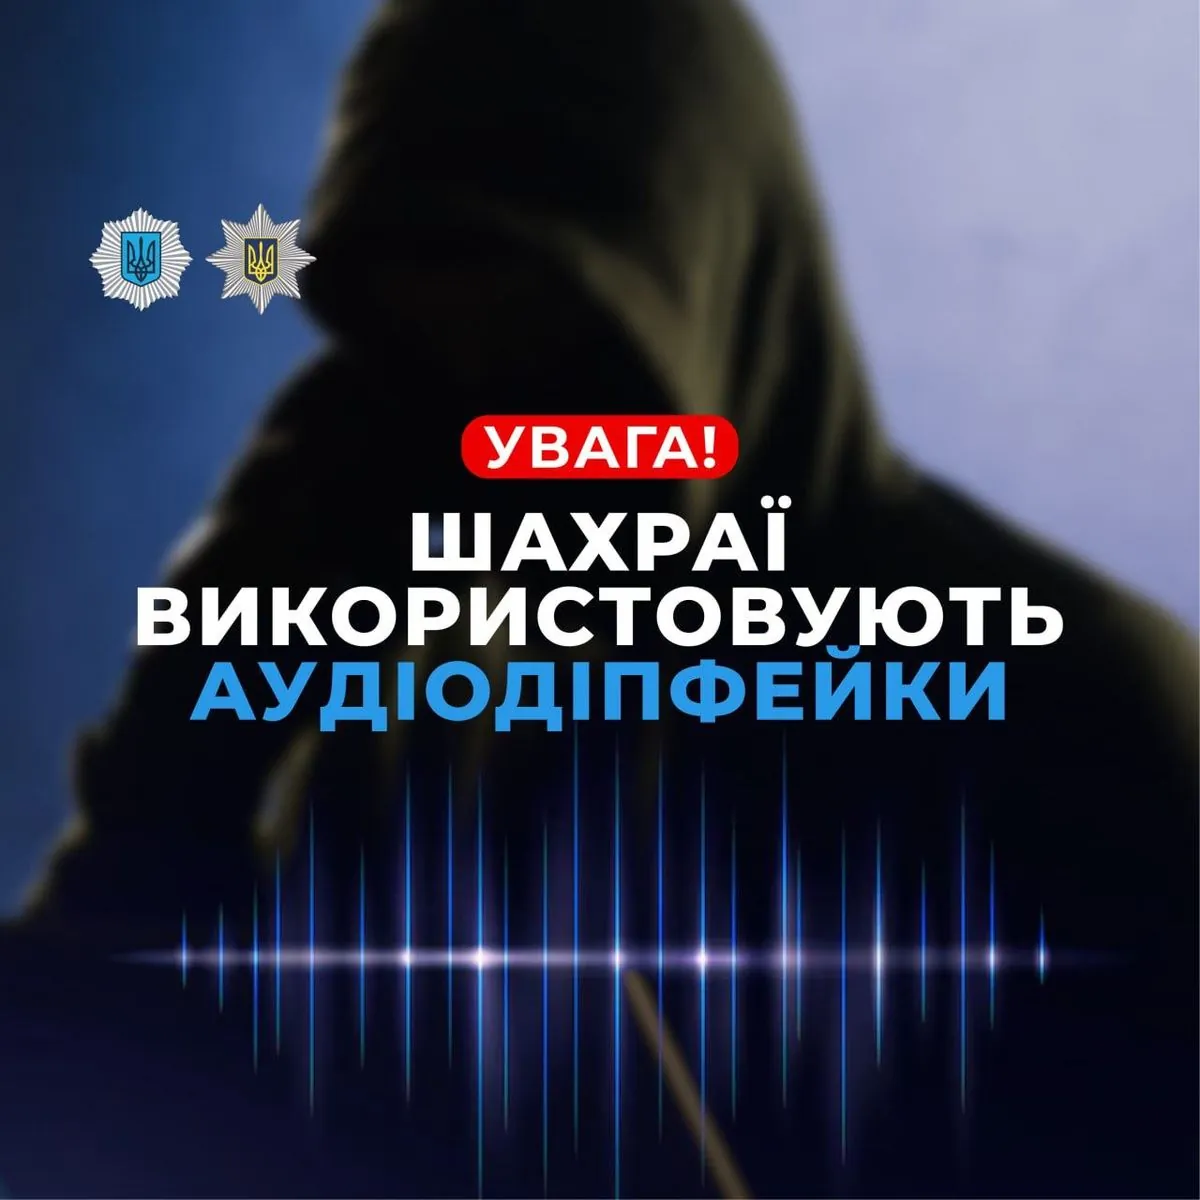 Ministry of Internal Affairs warns of new methods of cyber fraud with audio dipsticks